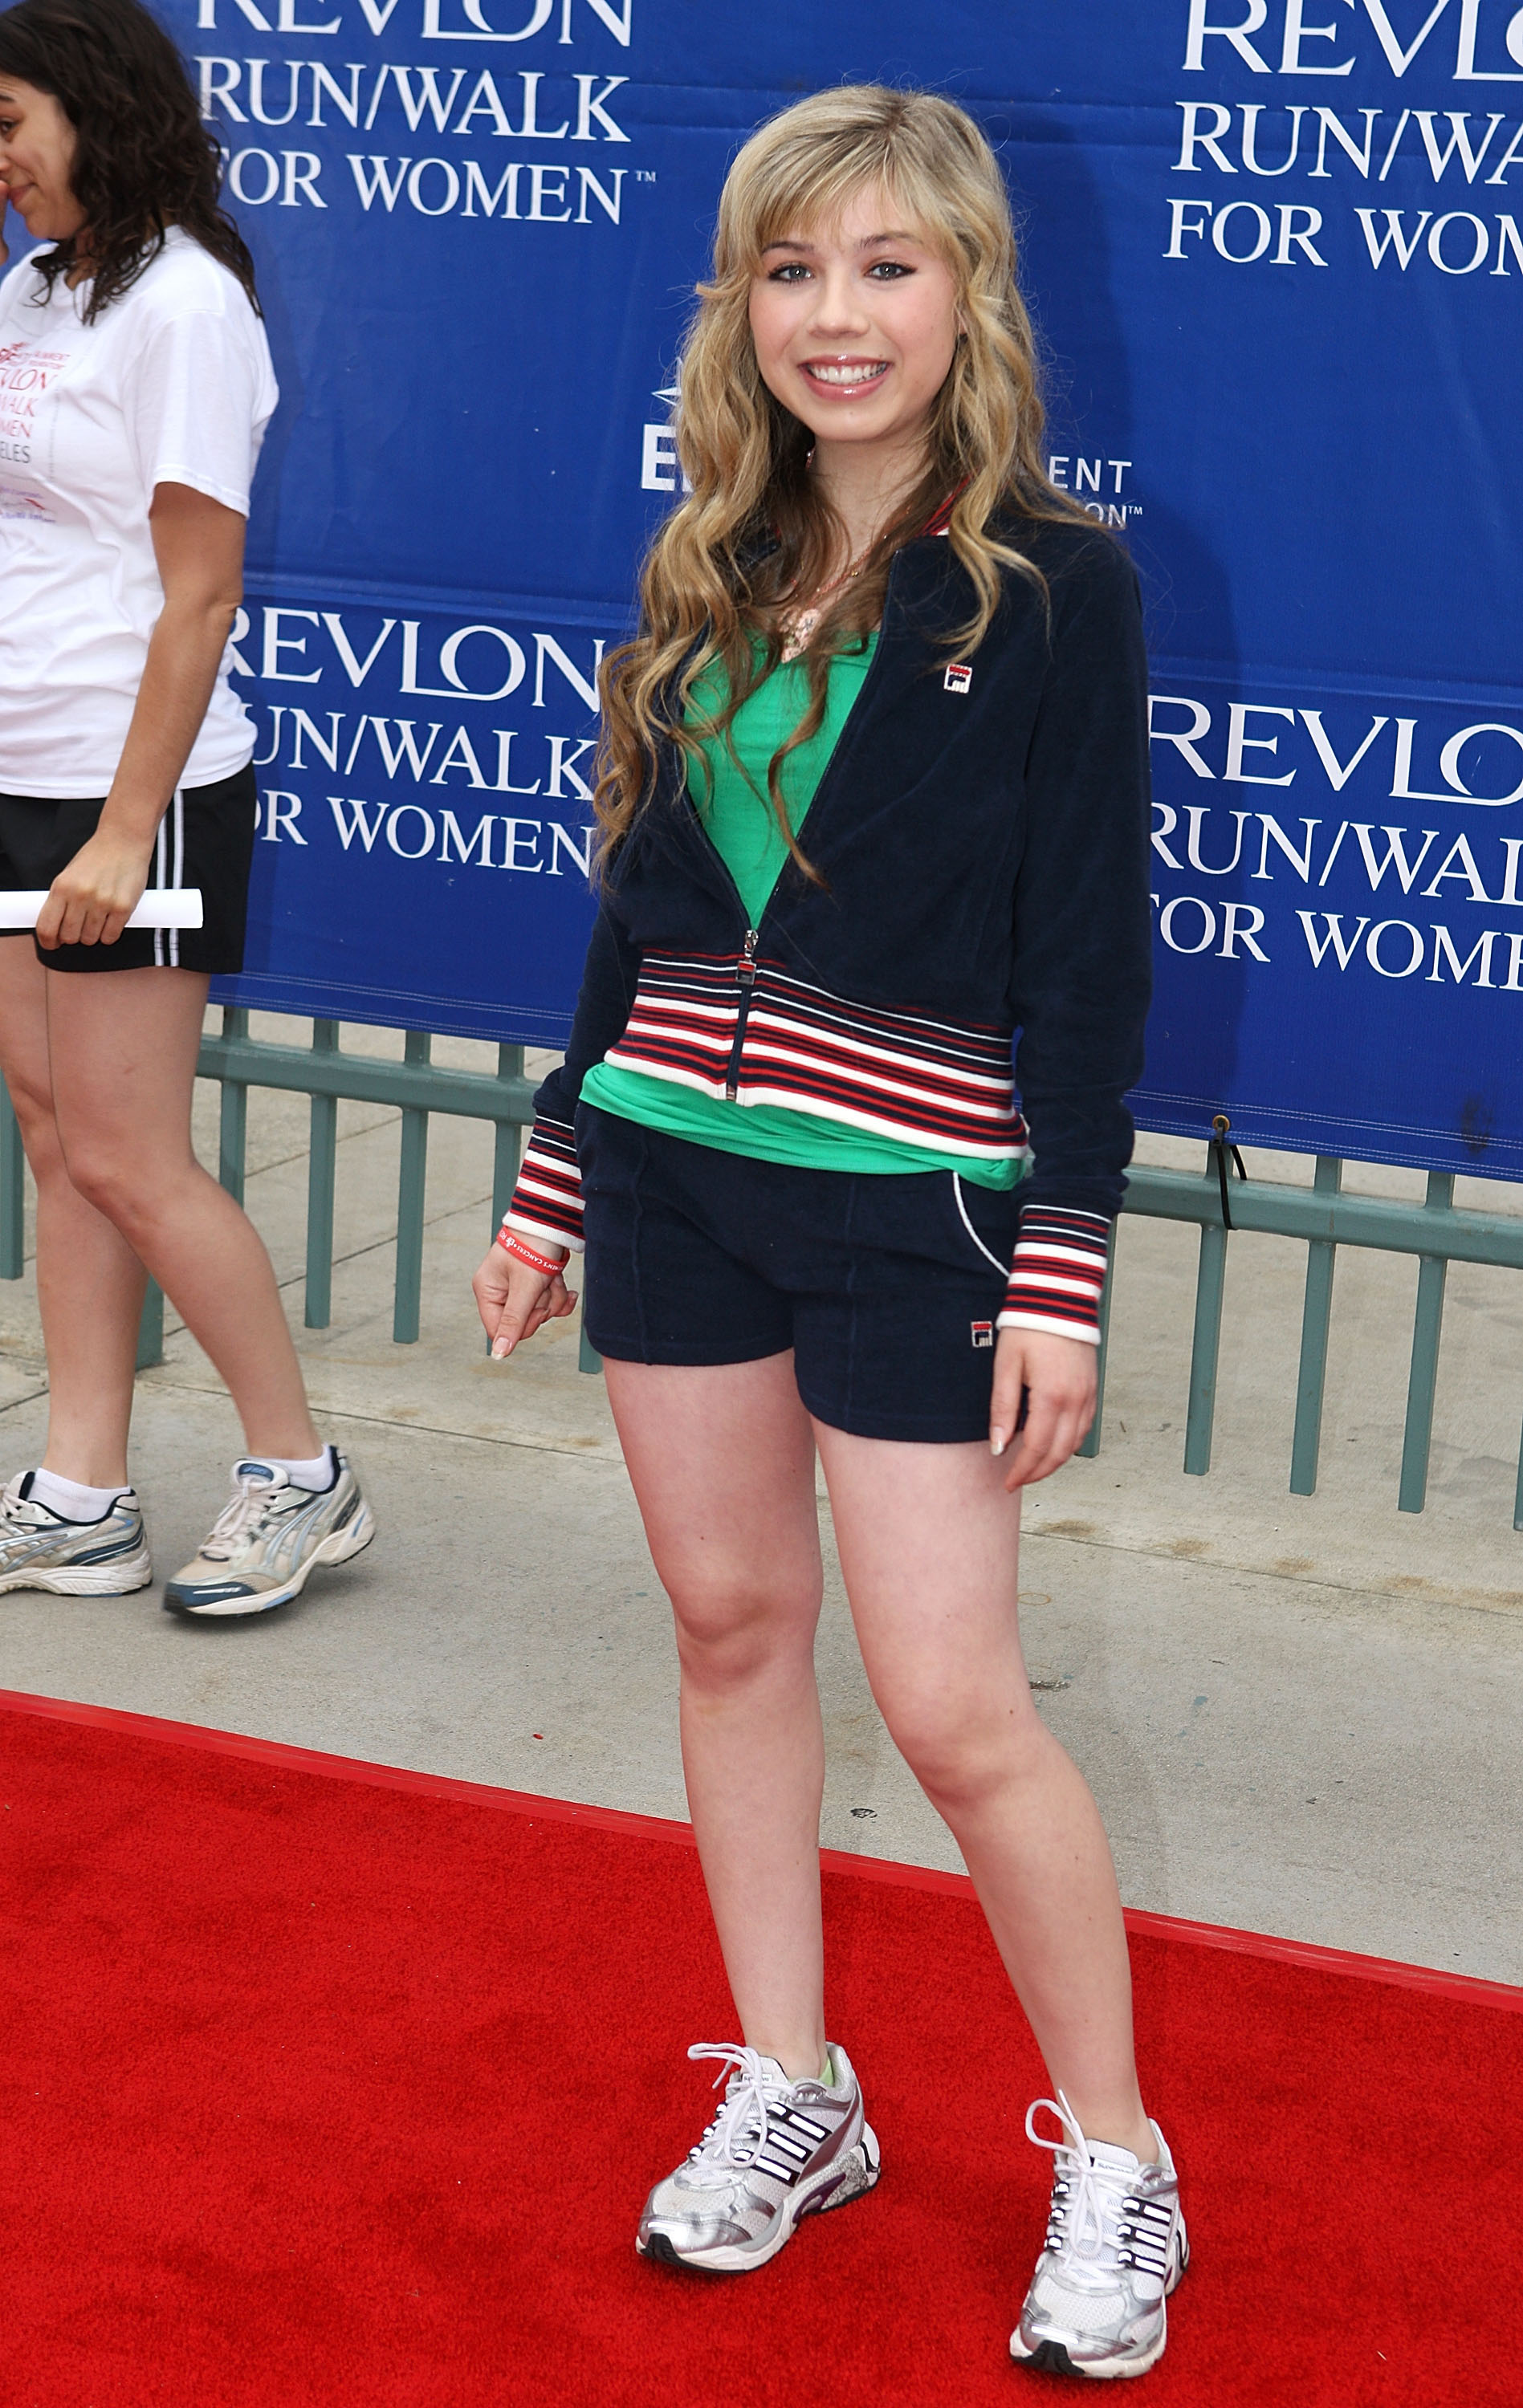 Jennette McCurdy attends the 15th Annual Entertainment Industry Foundation's Revlon Run/Walk on May 9, 2008 | Source: Getty Images